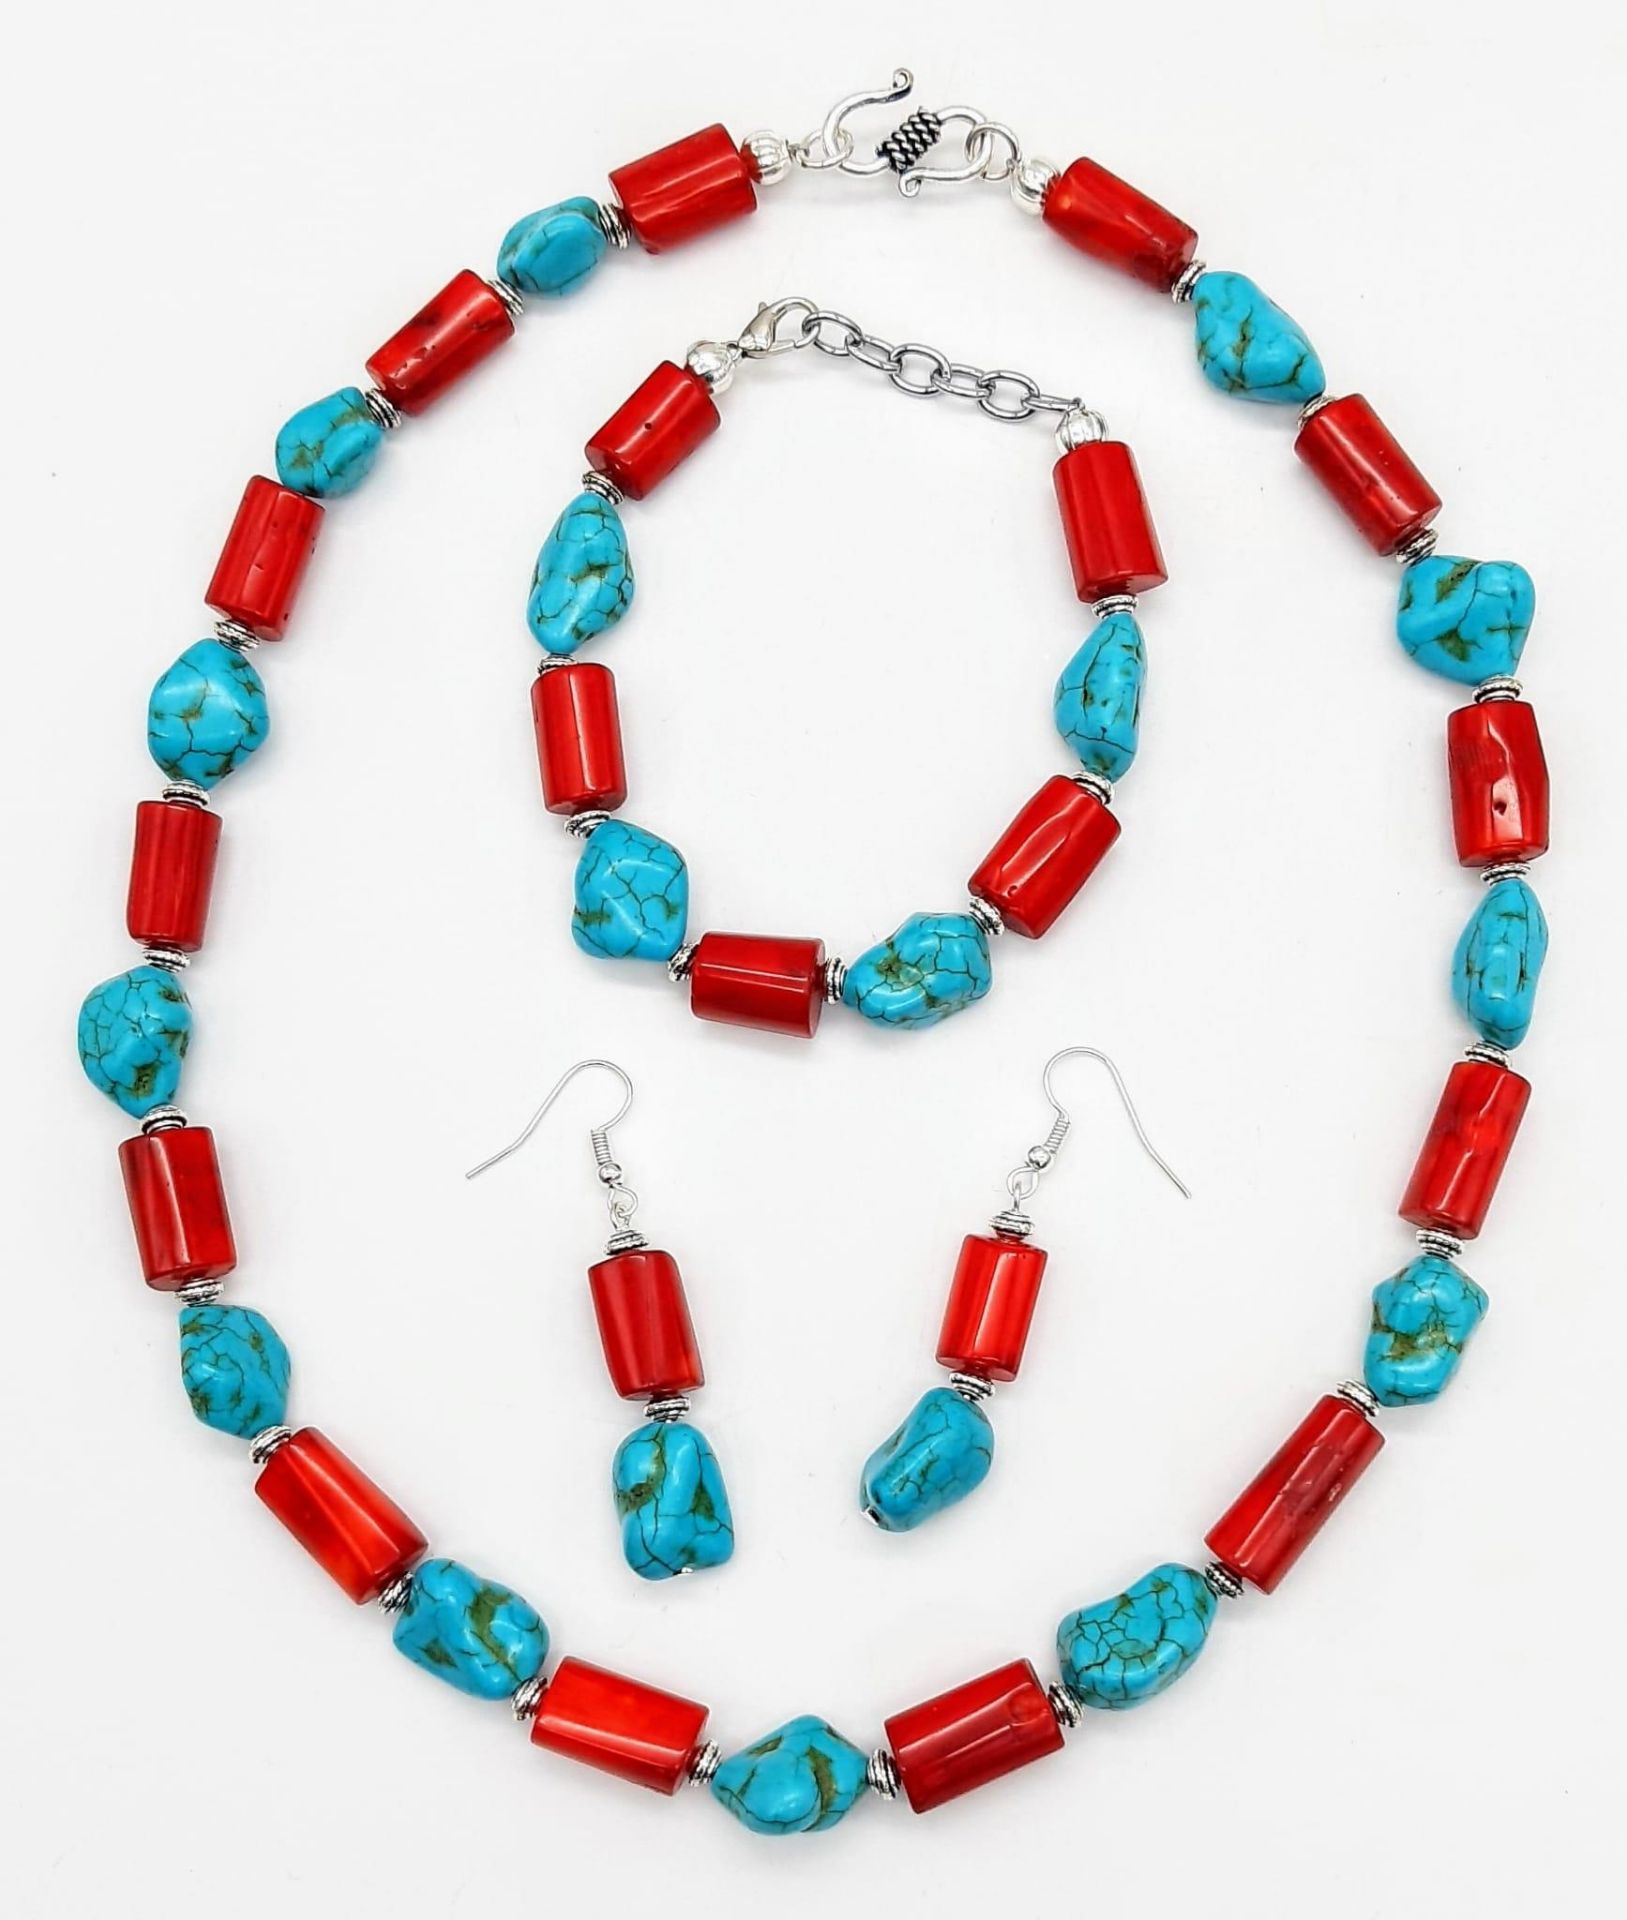 A substantial, chunky red coral and turquoise nugget necklace, bracelet and earrings set, in a